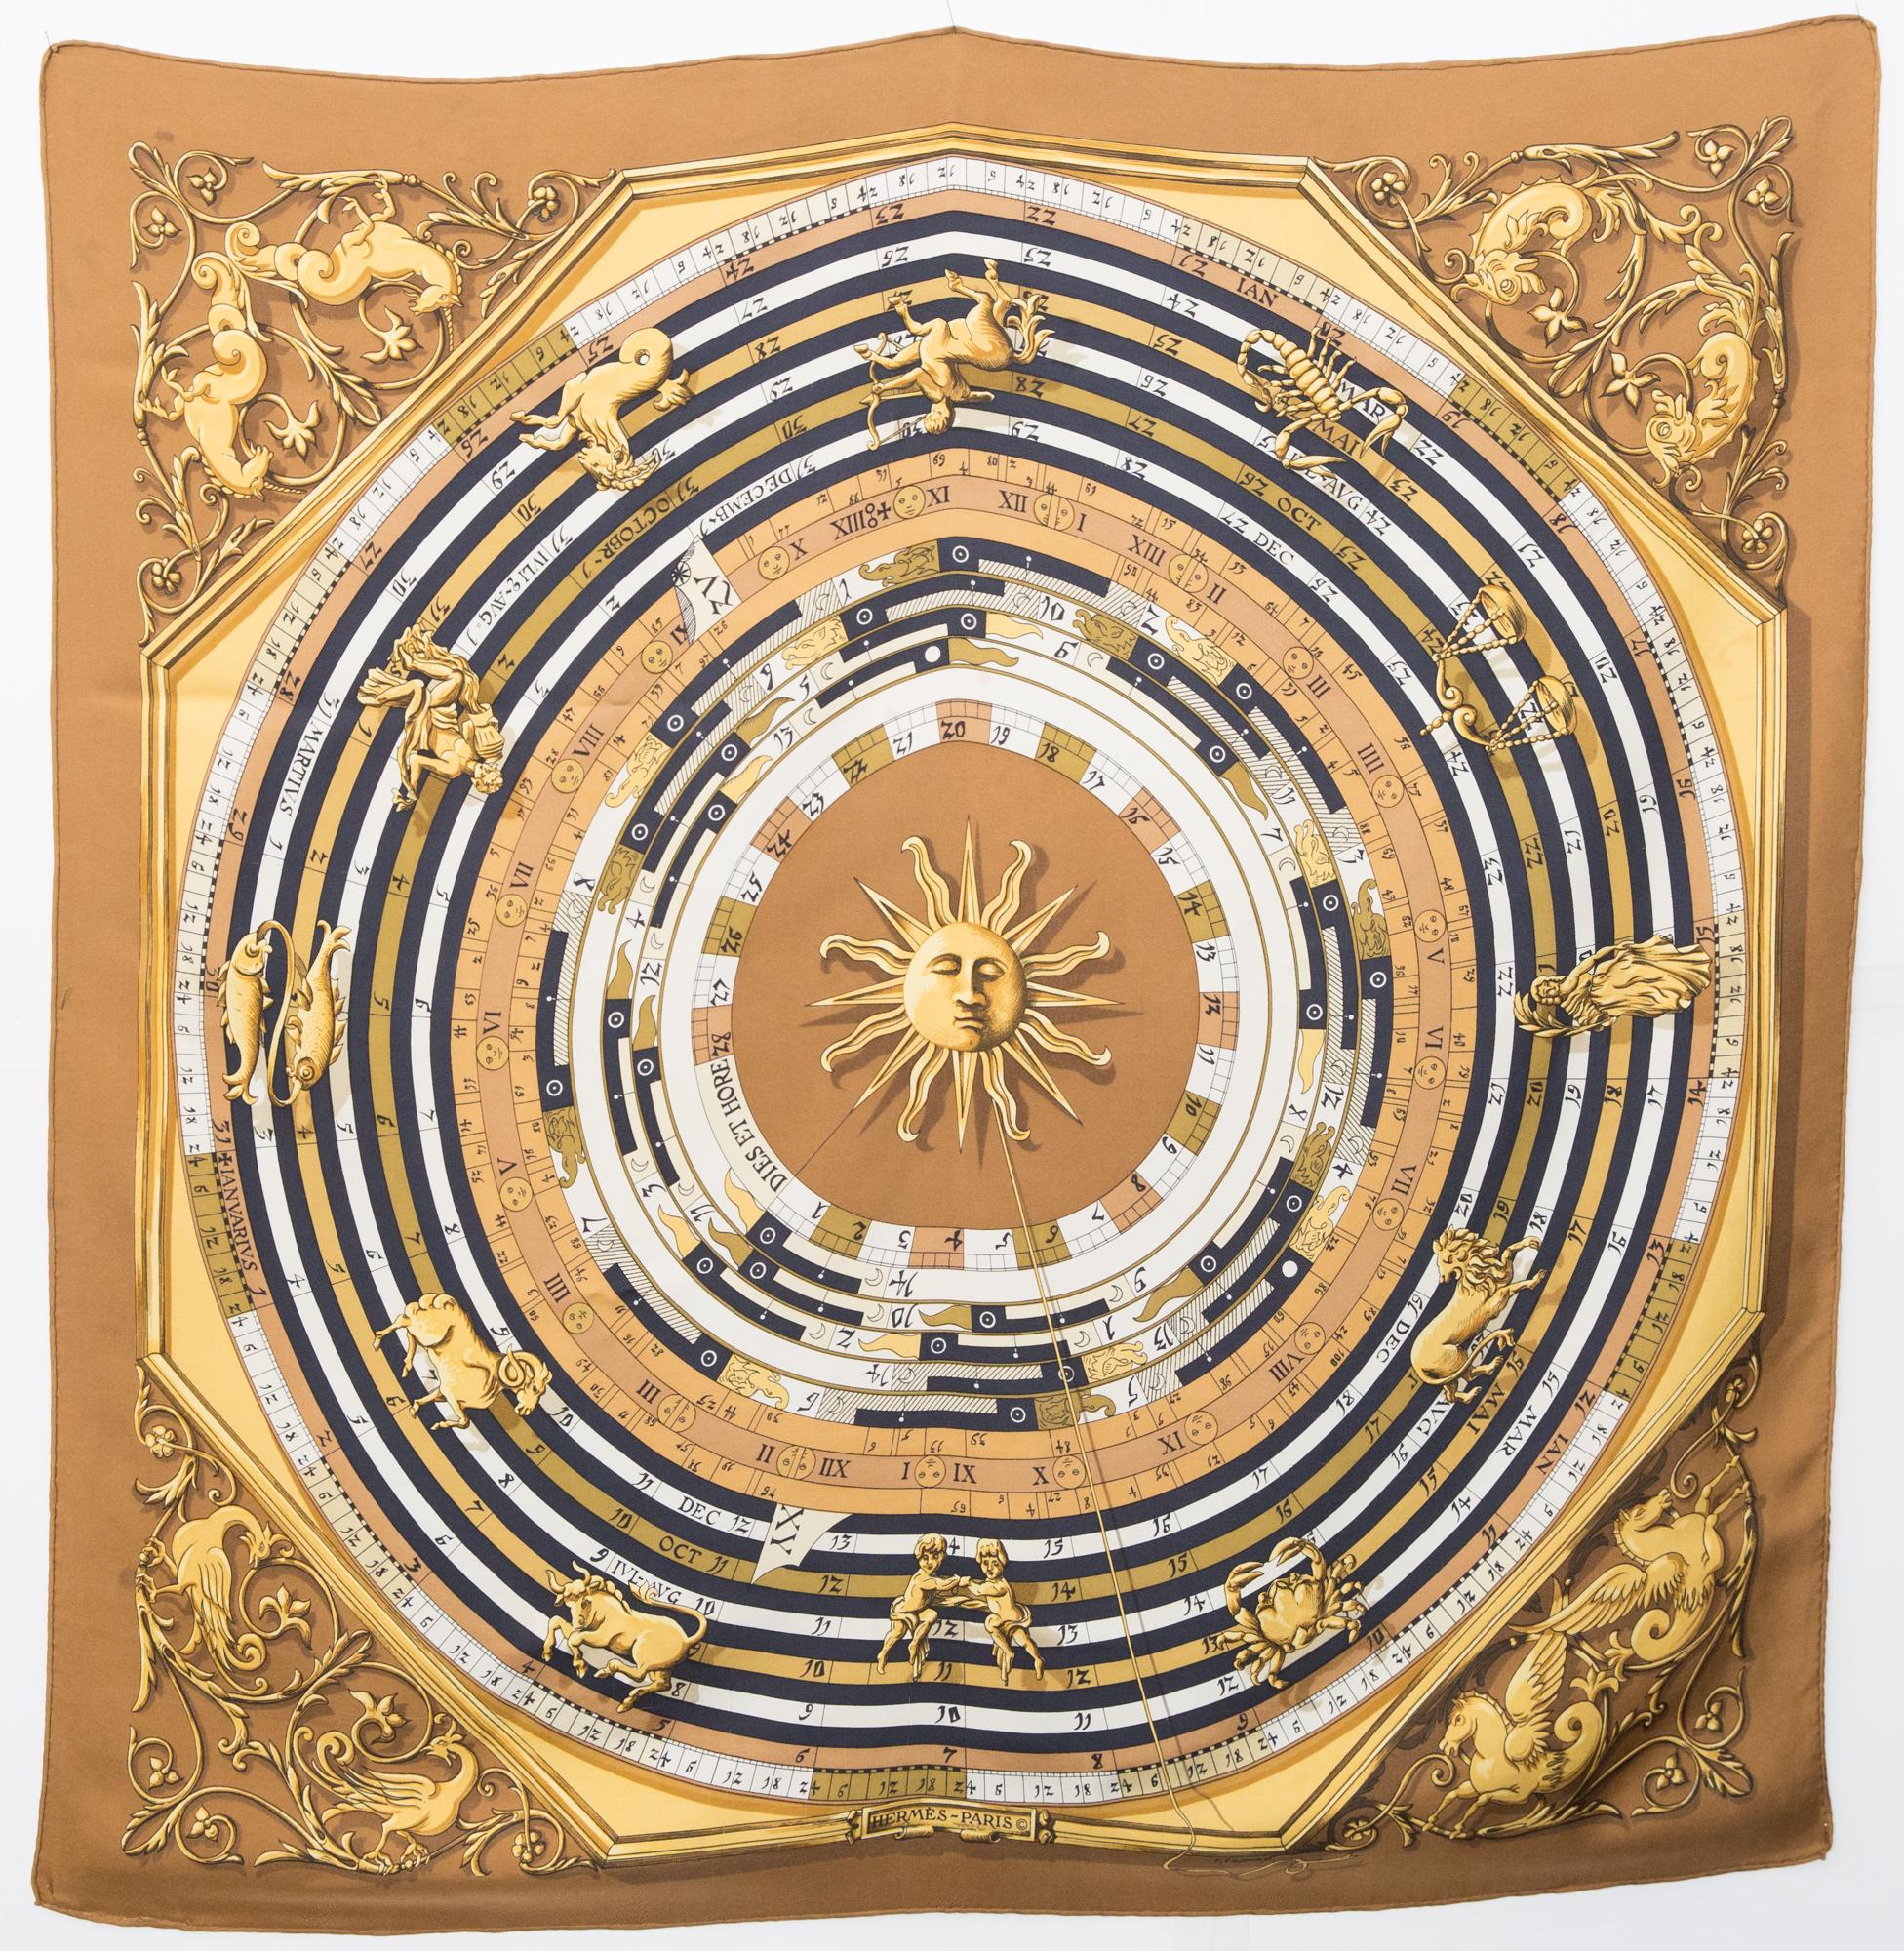 Hermes Camel Astrology Dies et Hore by F. Faconnet Silk Scarf In Good Condition For Sale In Paris, FR